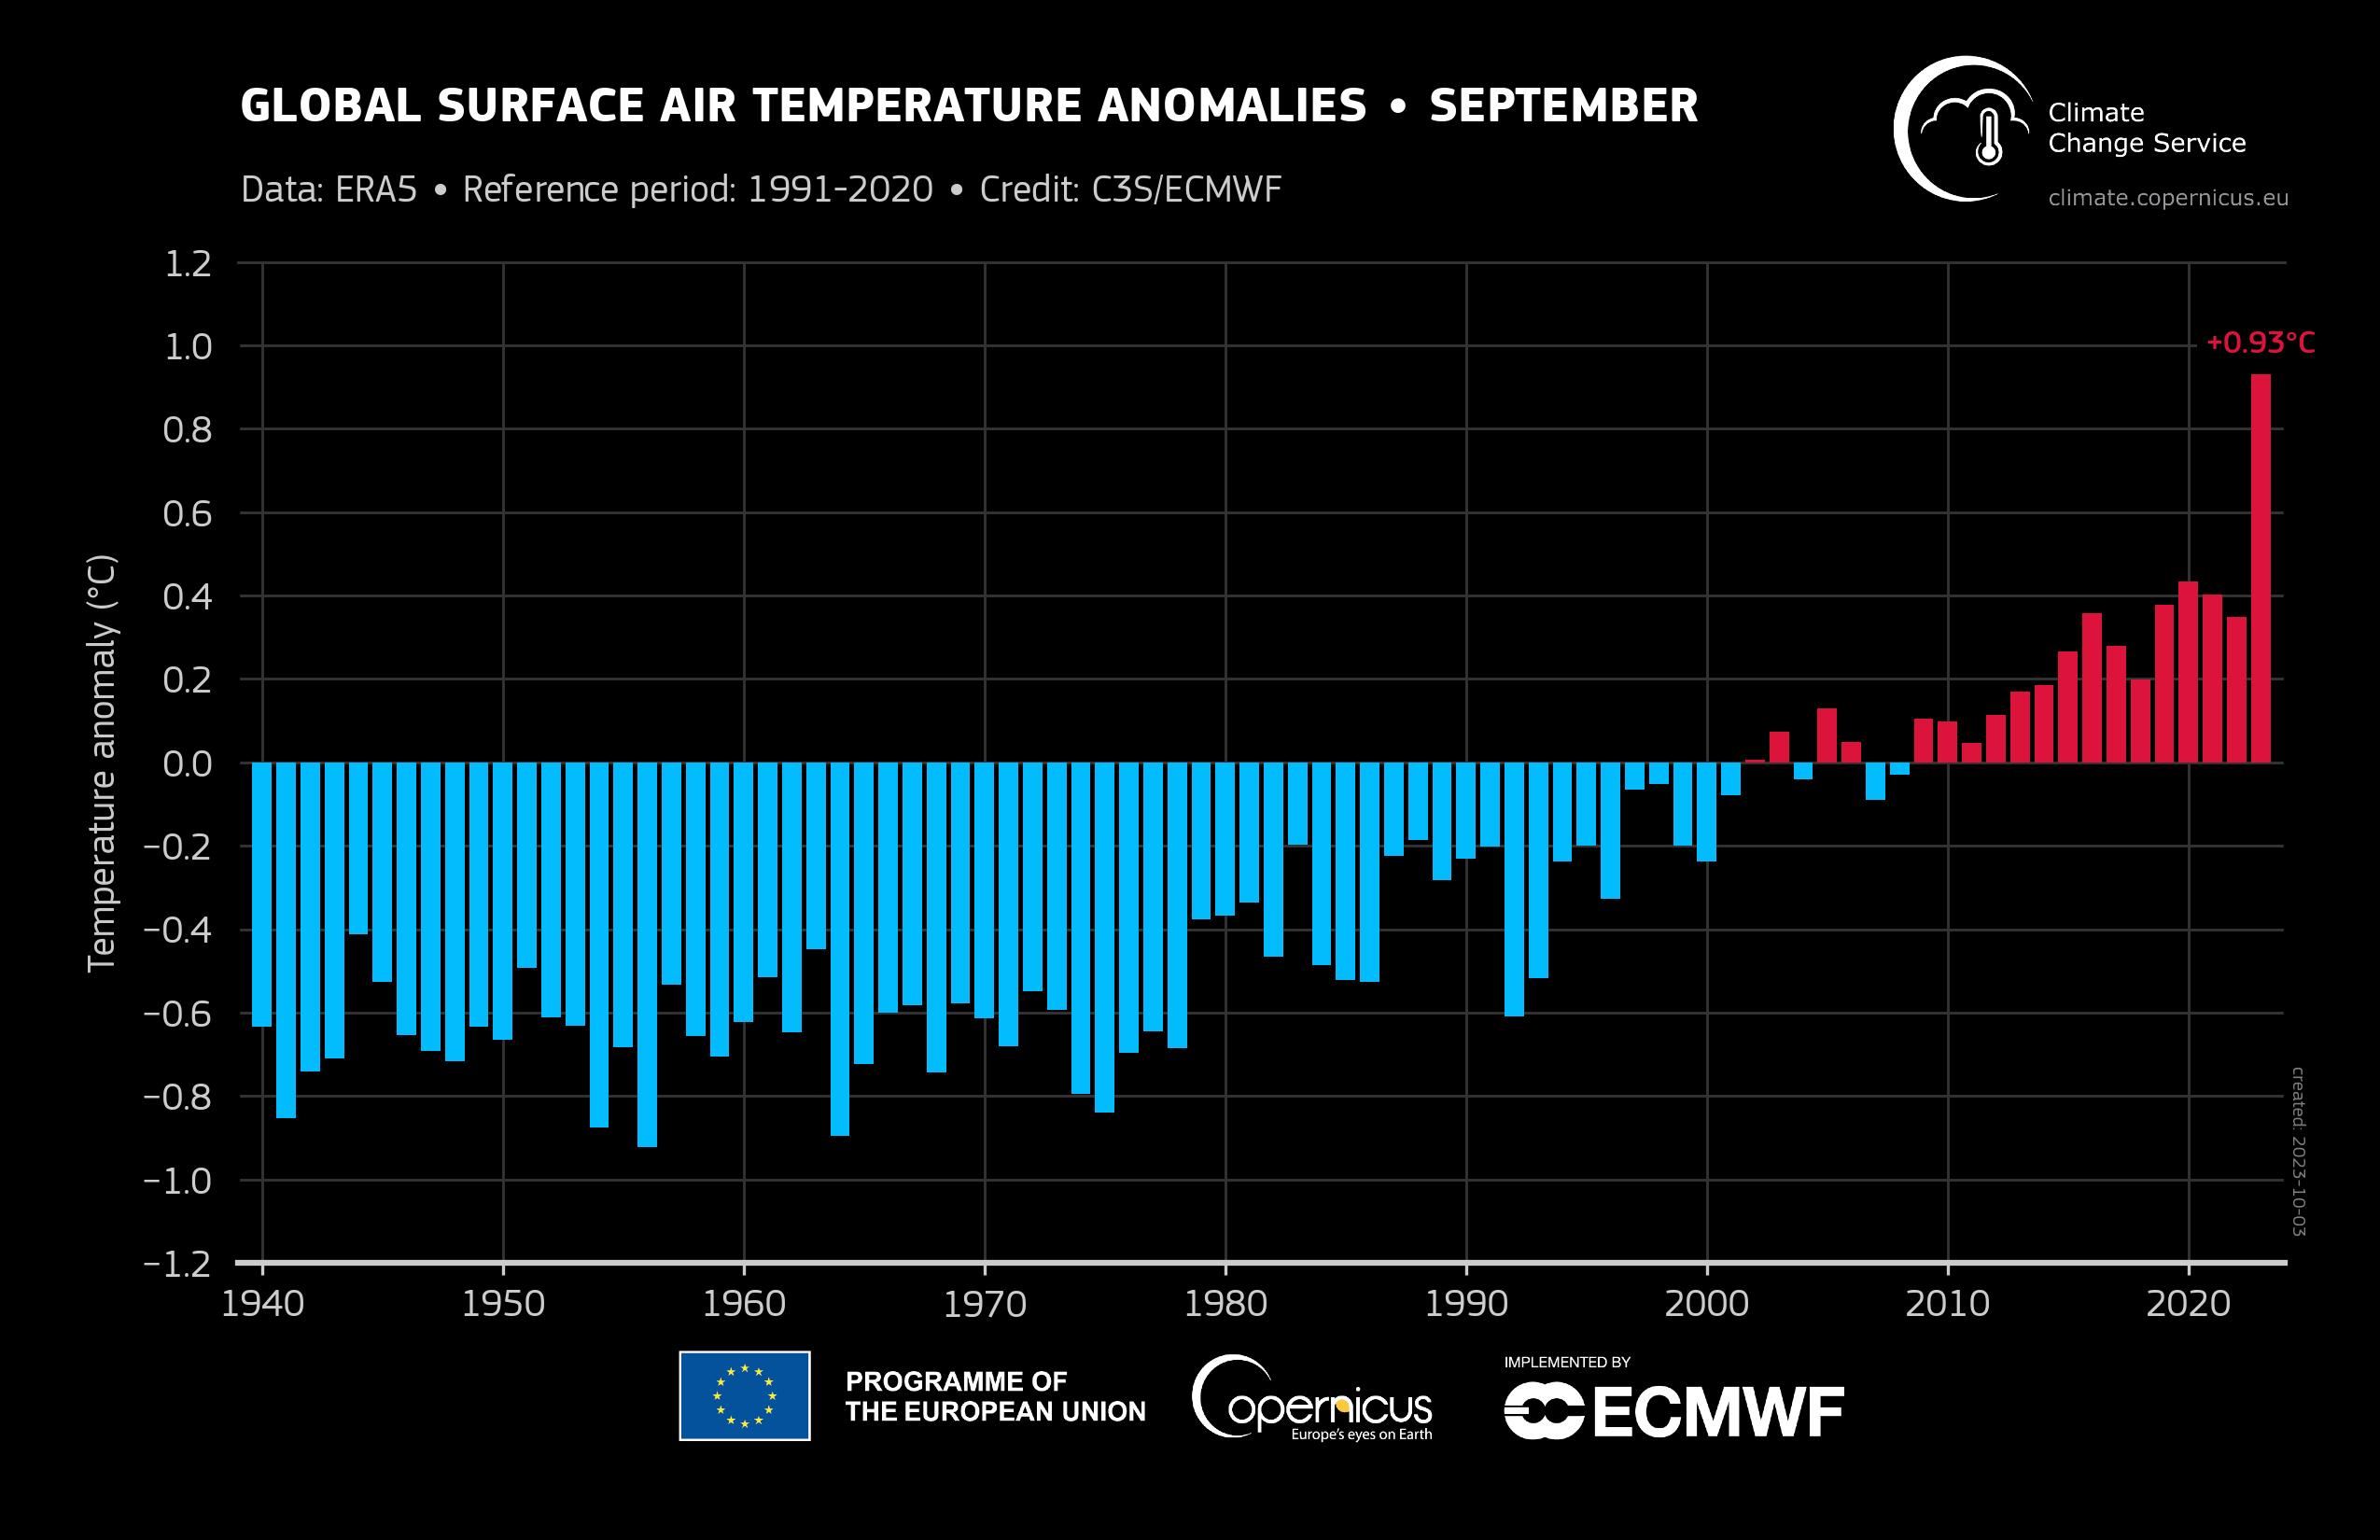 Globally averaged surface air temperature anomalies relative to 1991–2020 for each September from 1940 to 2023. Data source: ERA5. Credit: Copernicus Climate Change Service/ECMWF.